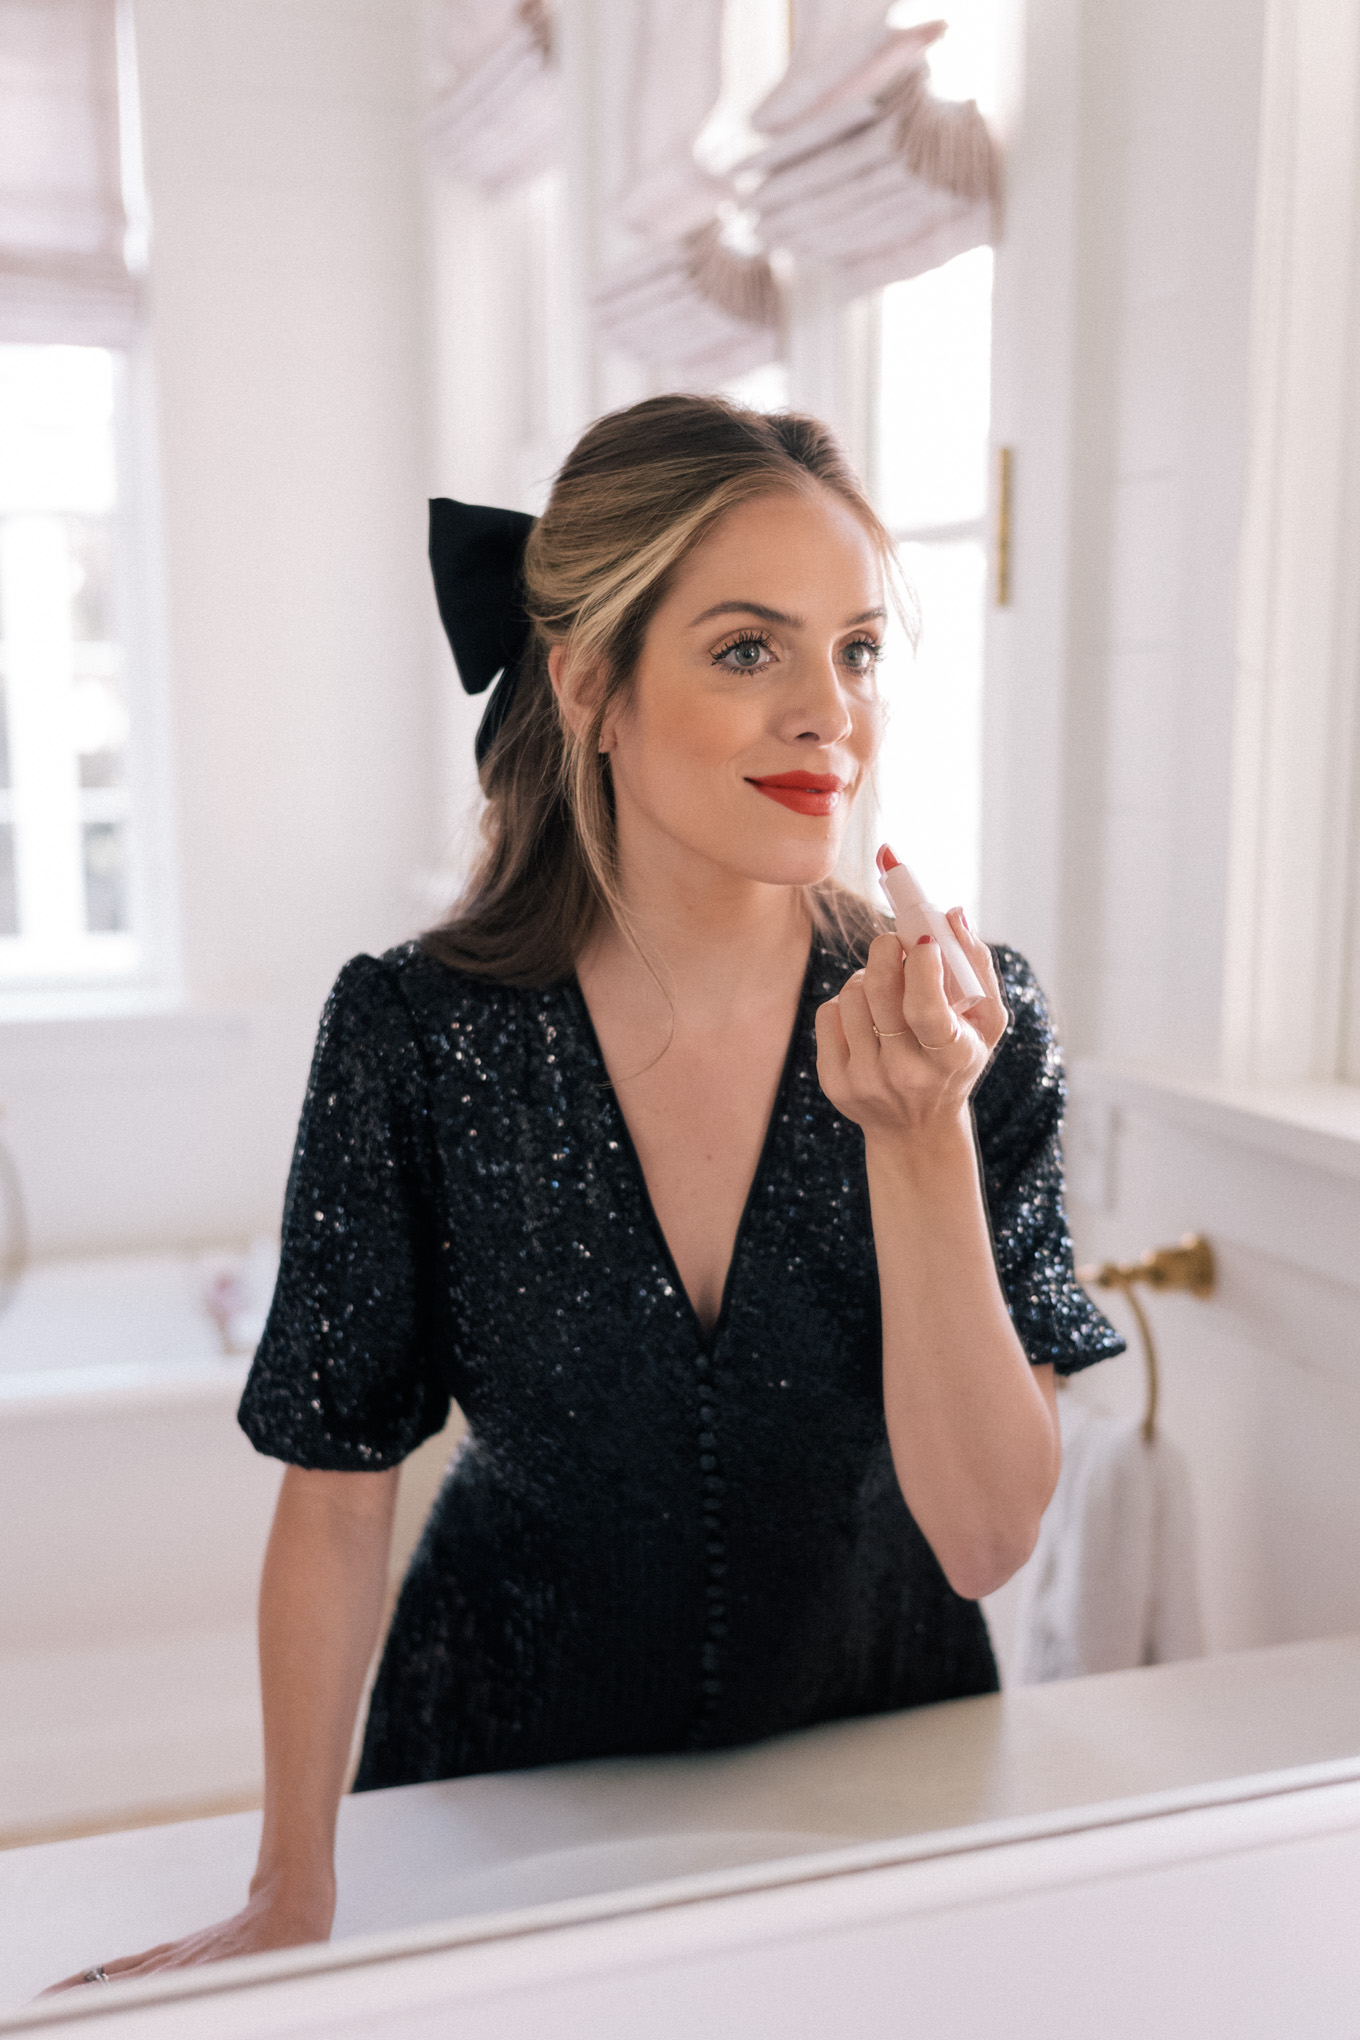 My Holiday Party Makeup Routine - Julia Berolzheimer